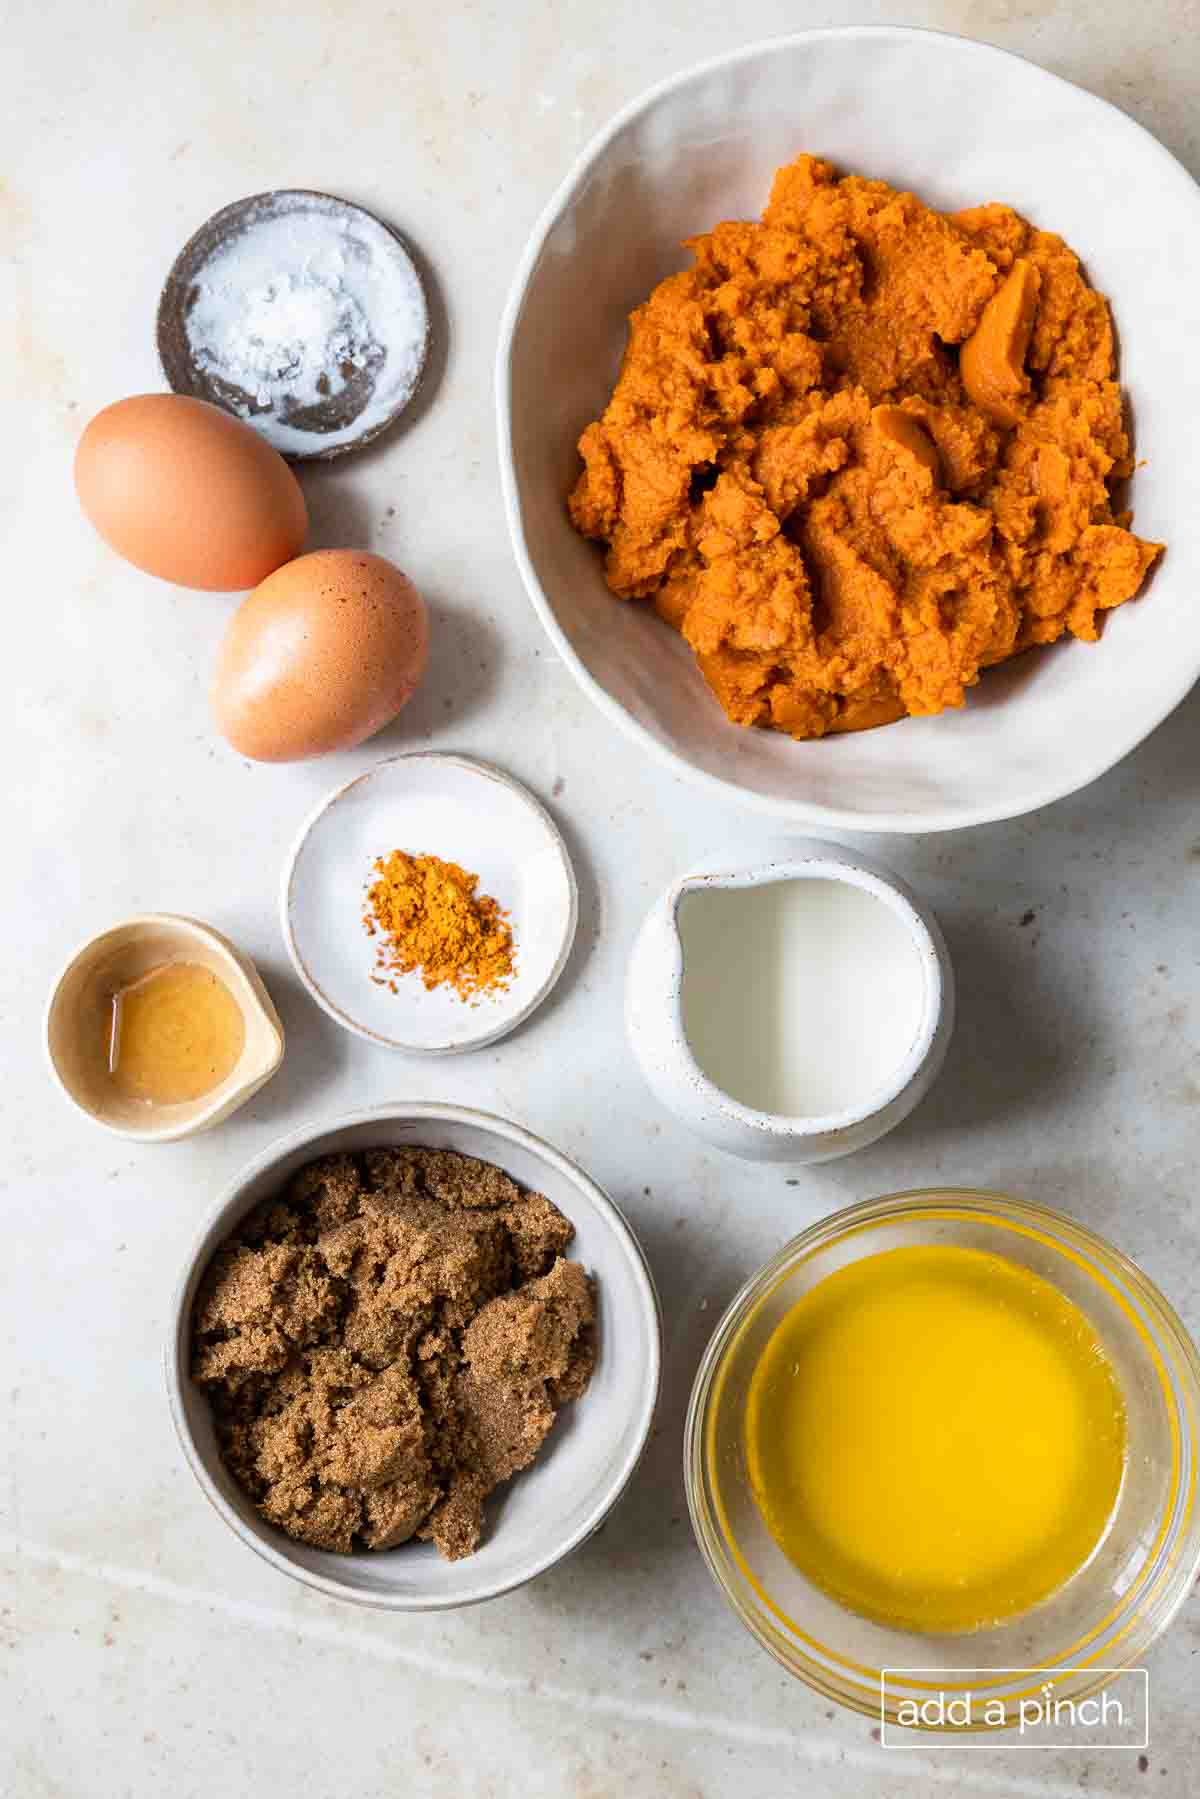 Pumpkin pie ingredients like melted butter, brown sugar, half and half, spices, eggs, salt and pumpkin puree all on a white stone counter.